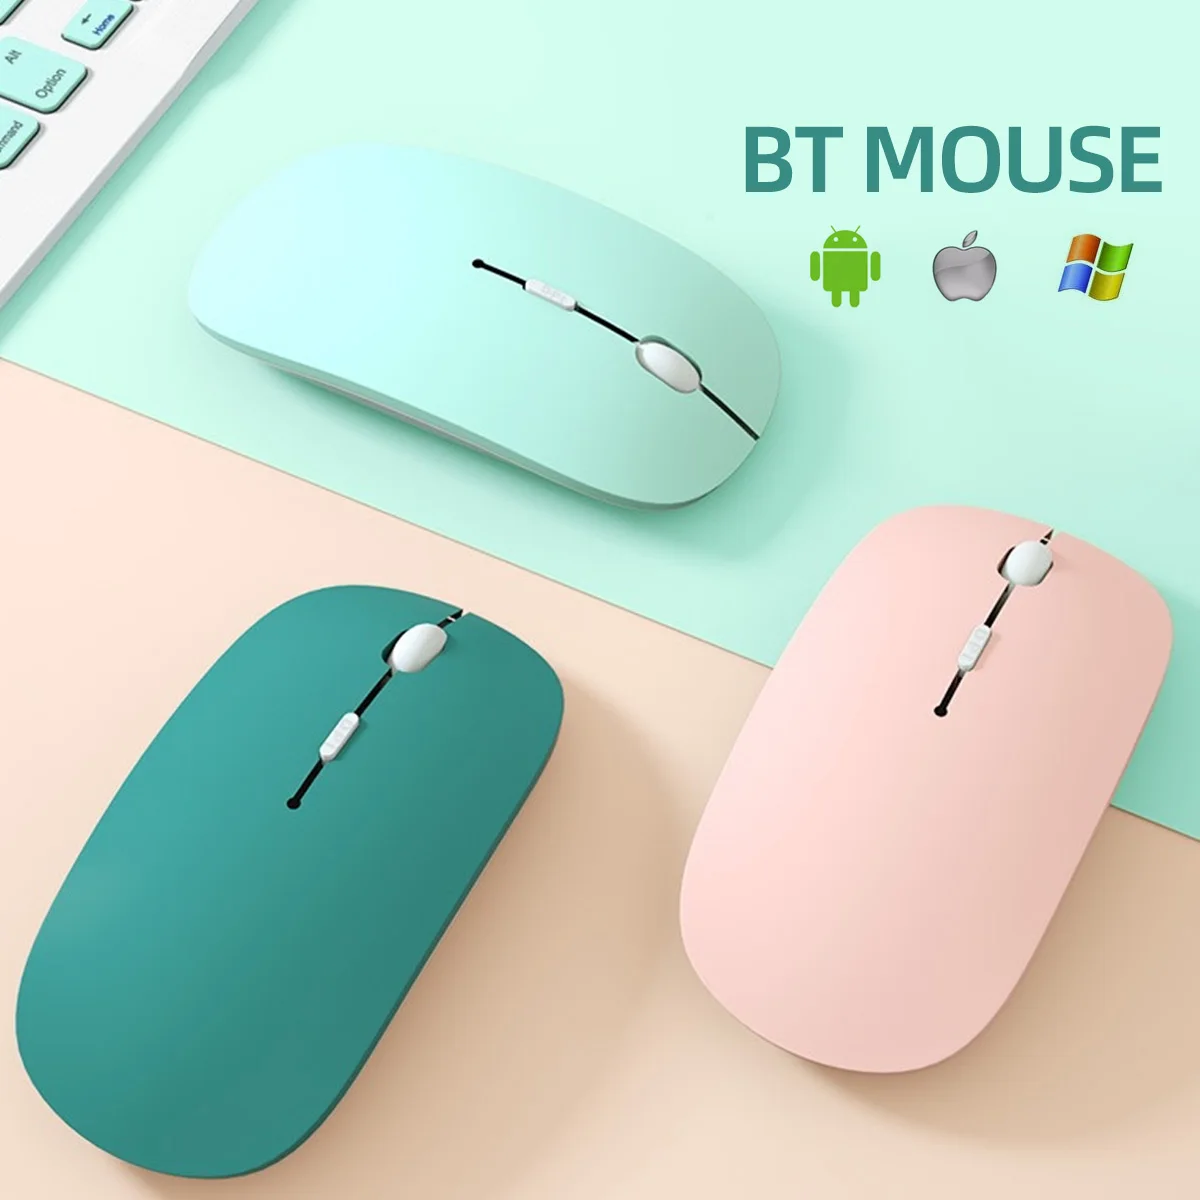 Mute Bluetooth Mouse For iPad Samsung Huawei Android Windows Tablet ultrathin green blue pink gaming Wireless Mouse Computer pc